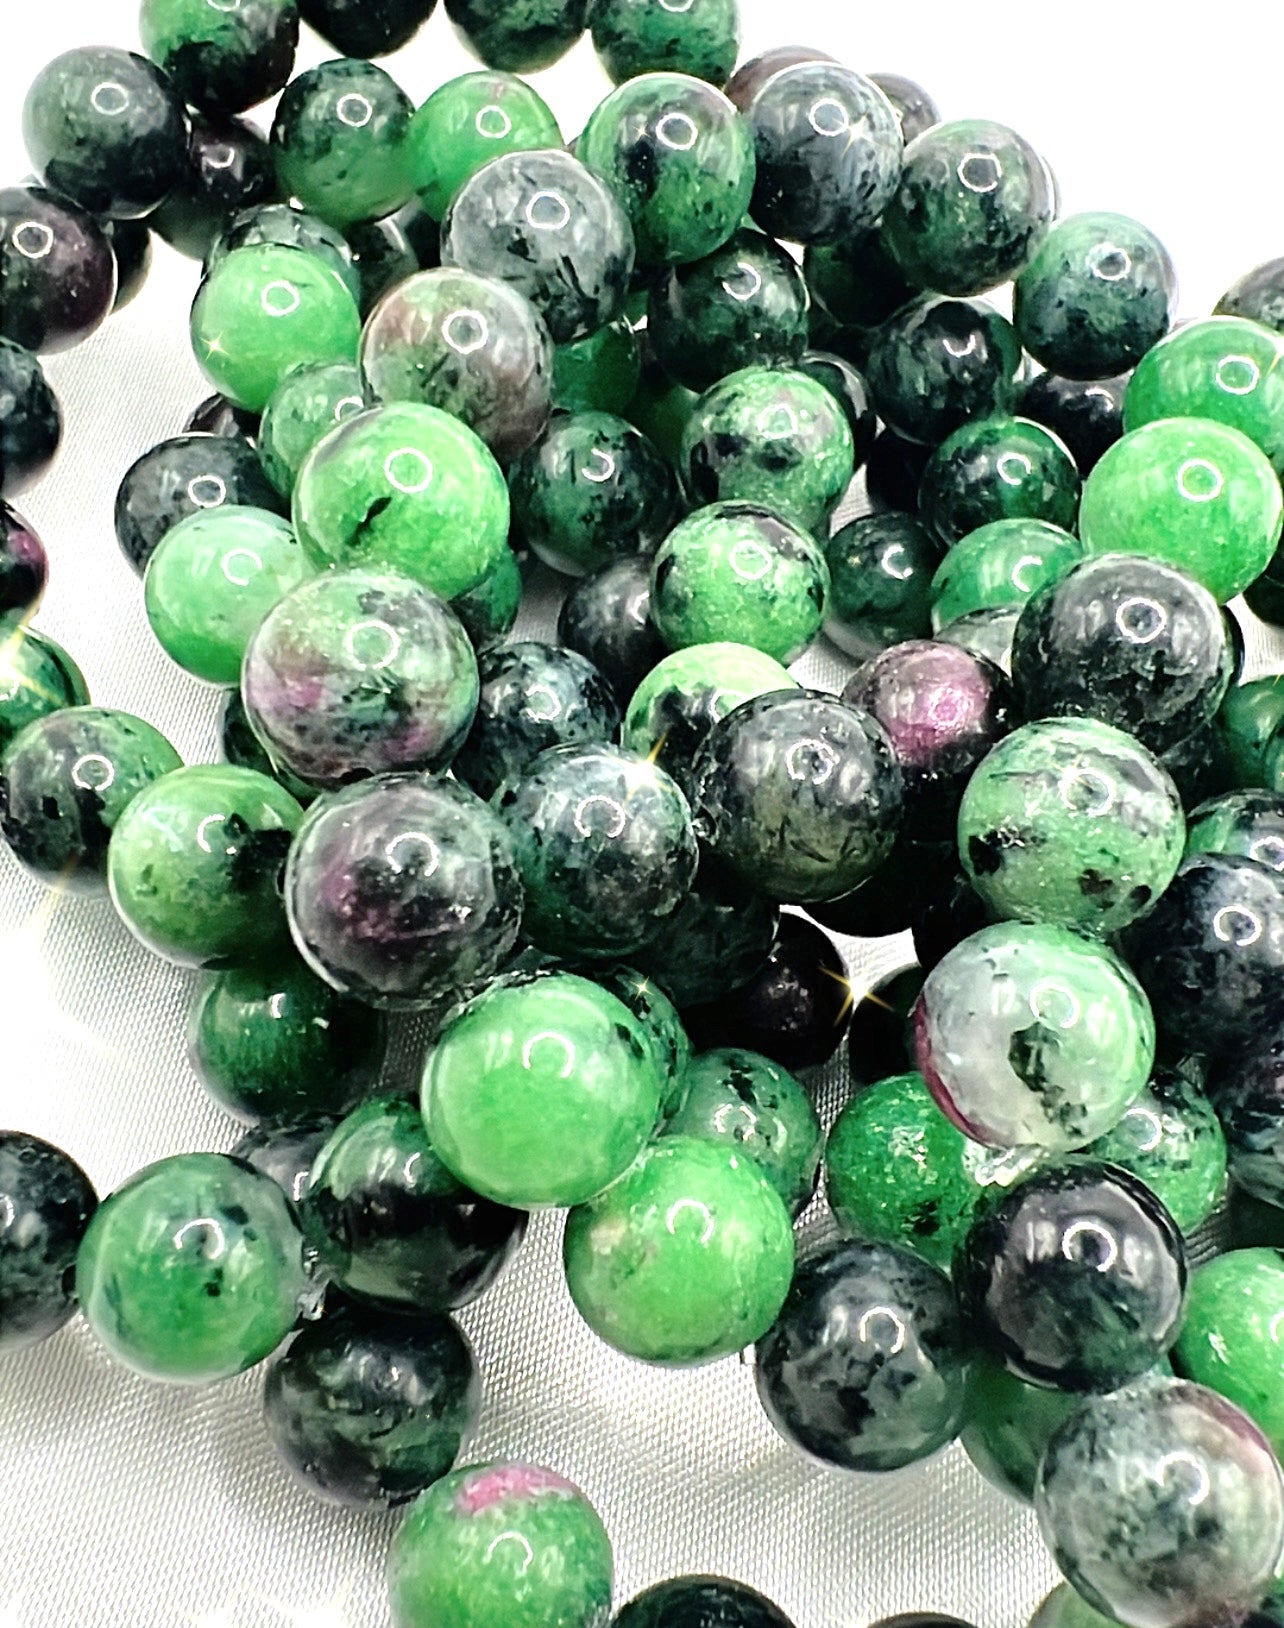 RUBY ZOISITE BRACELET-soothe emotional pain, make connections, fertility